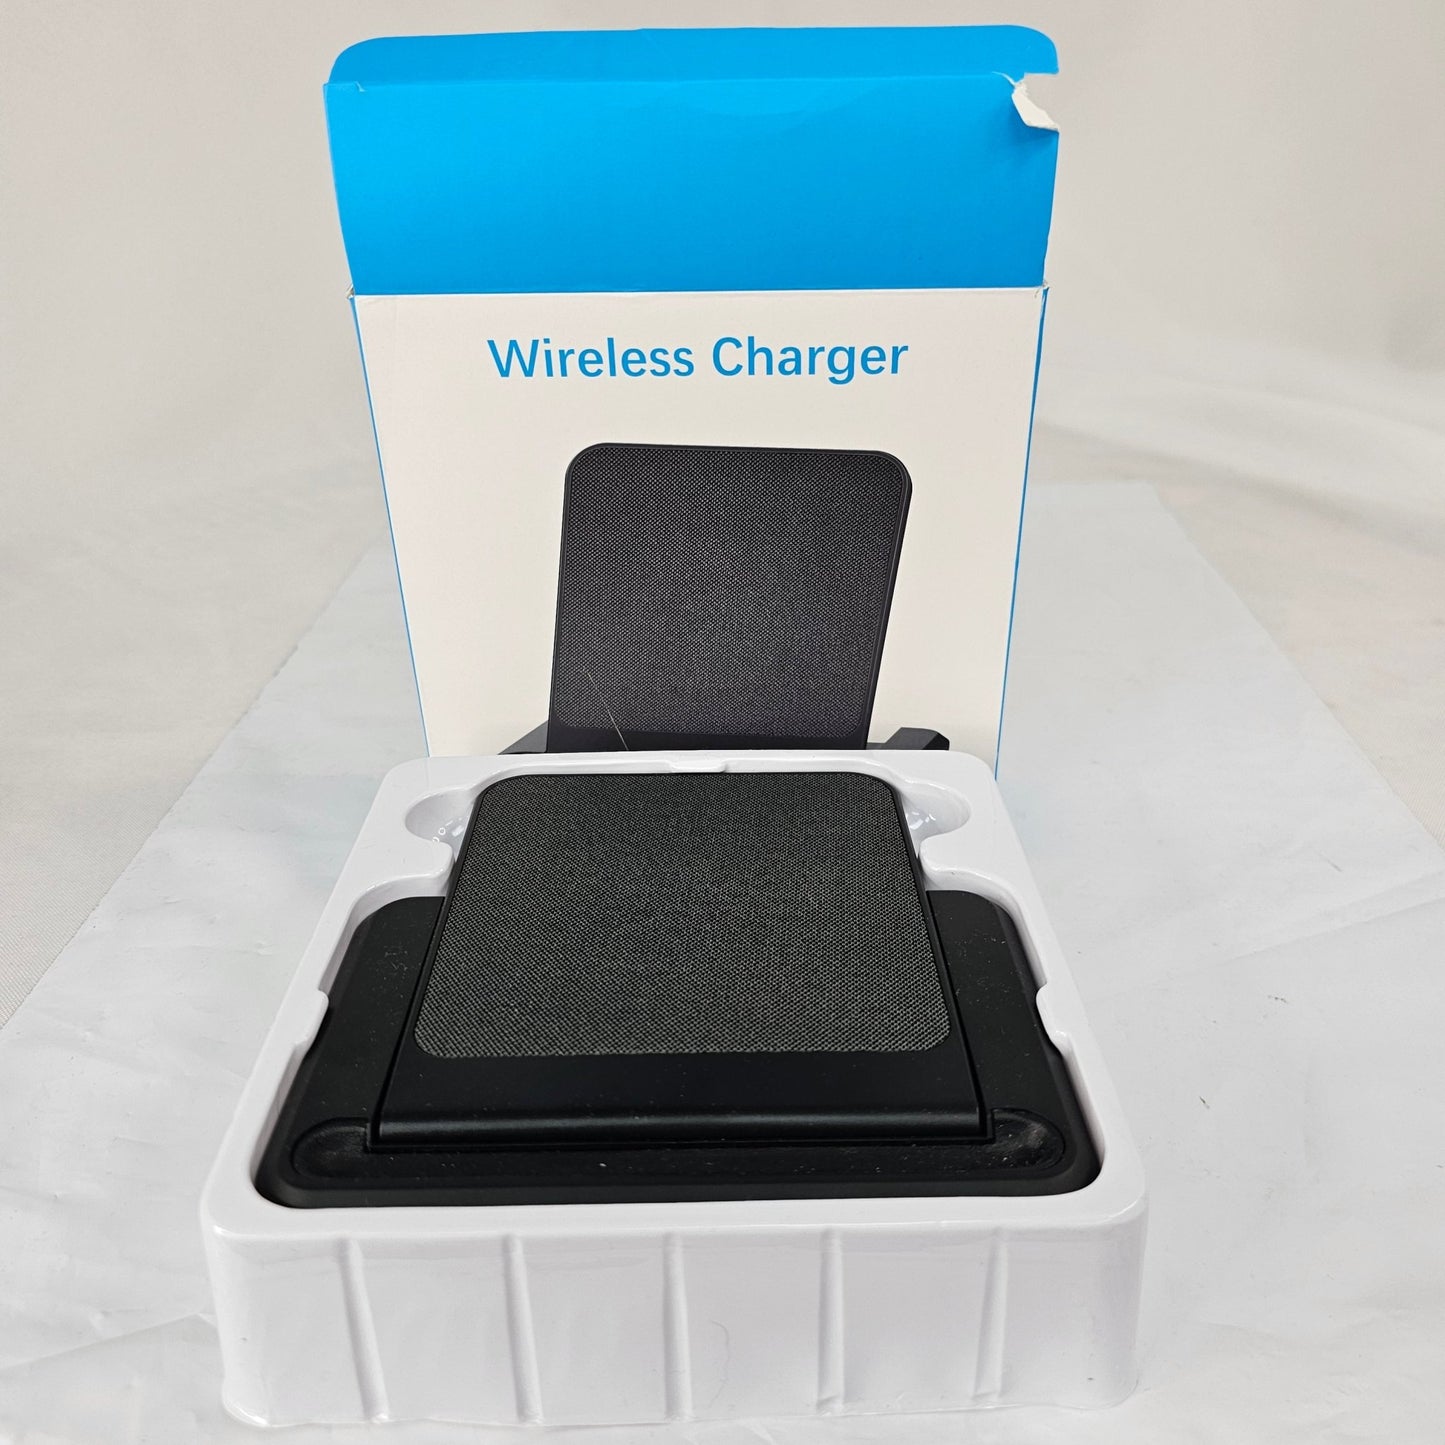 Wireless Charger - DQ Distribution